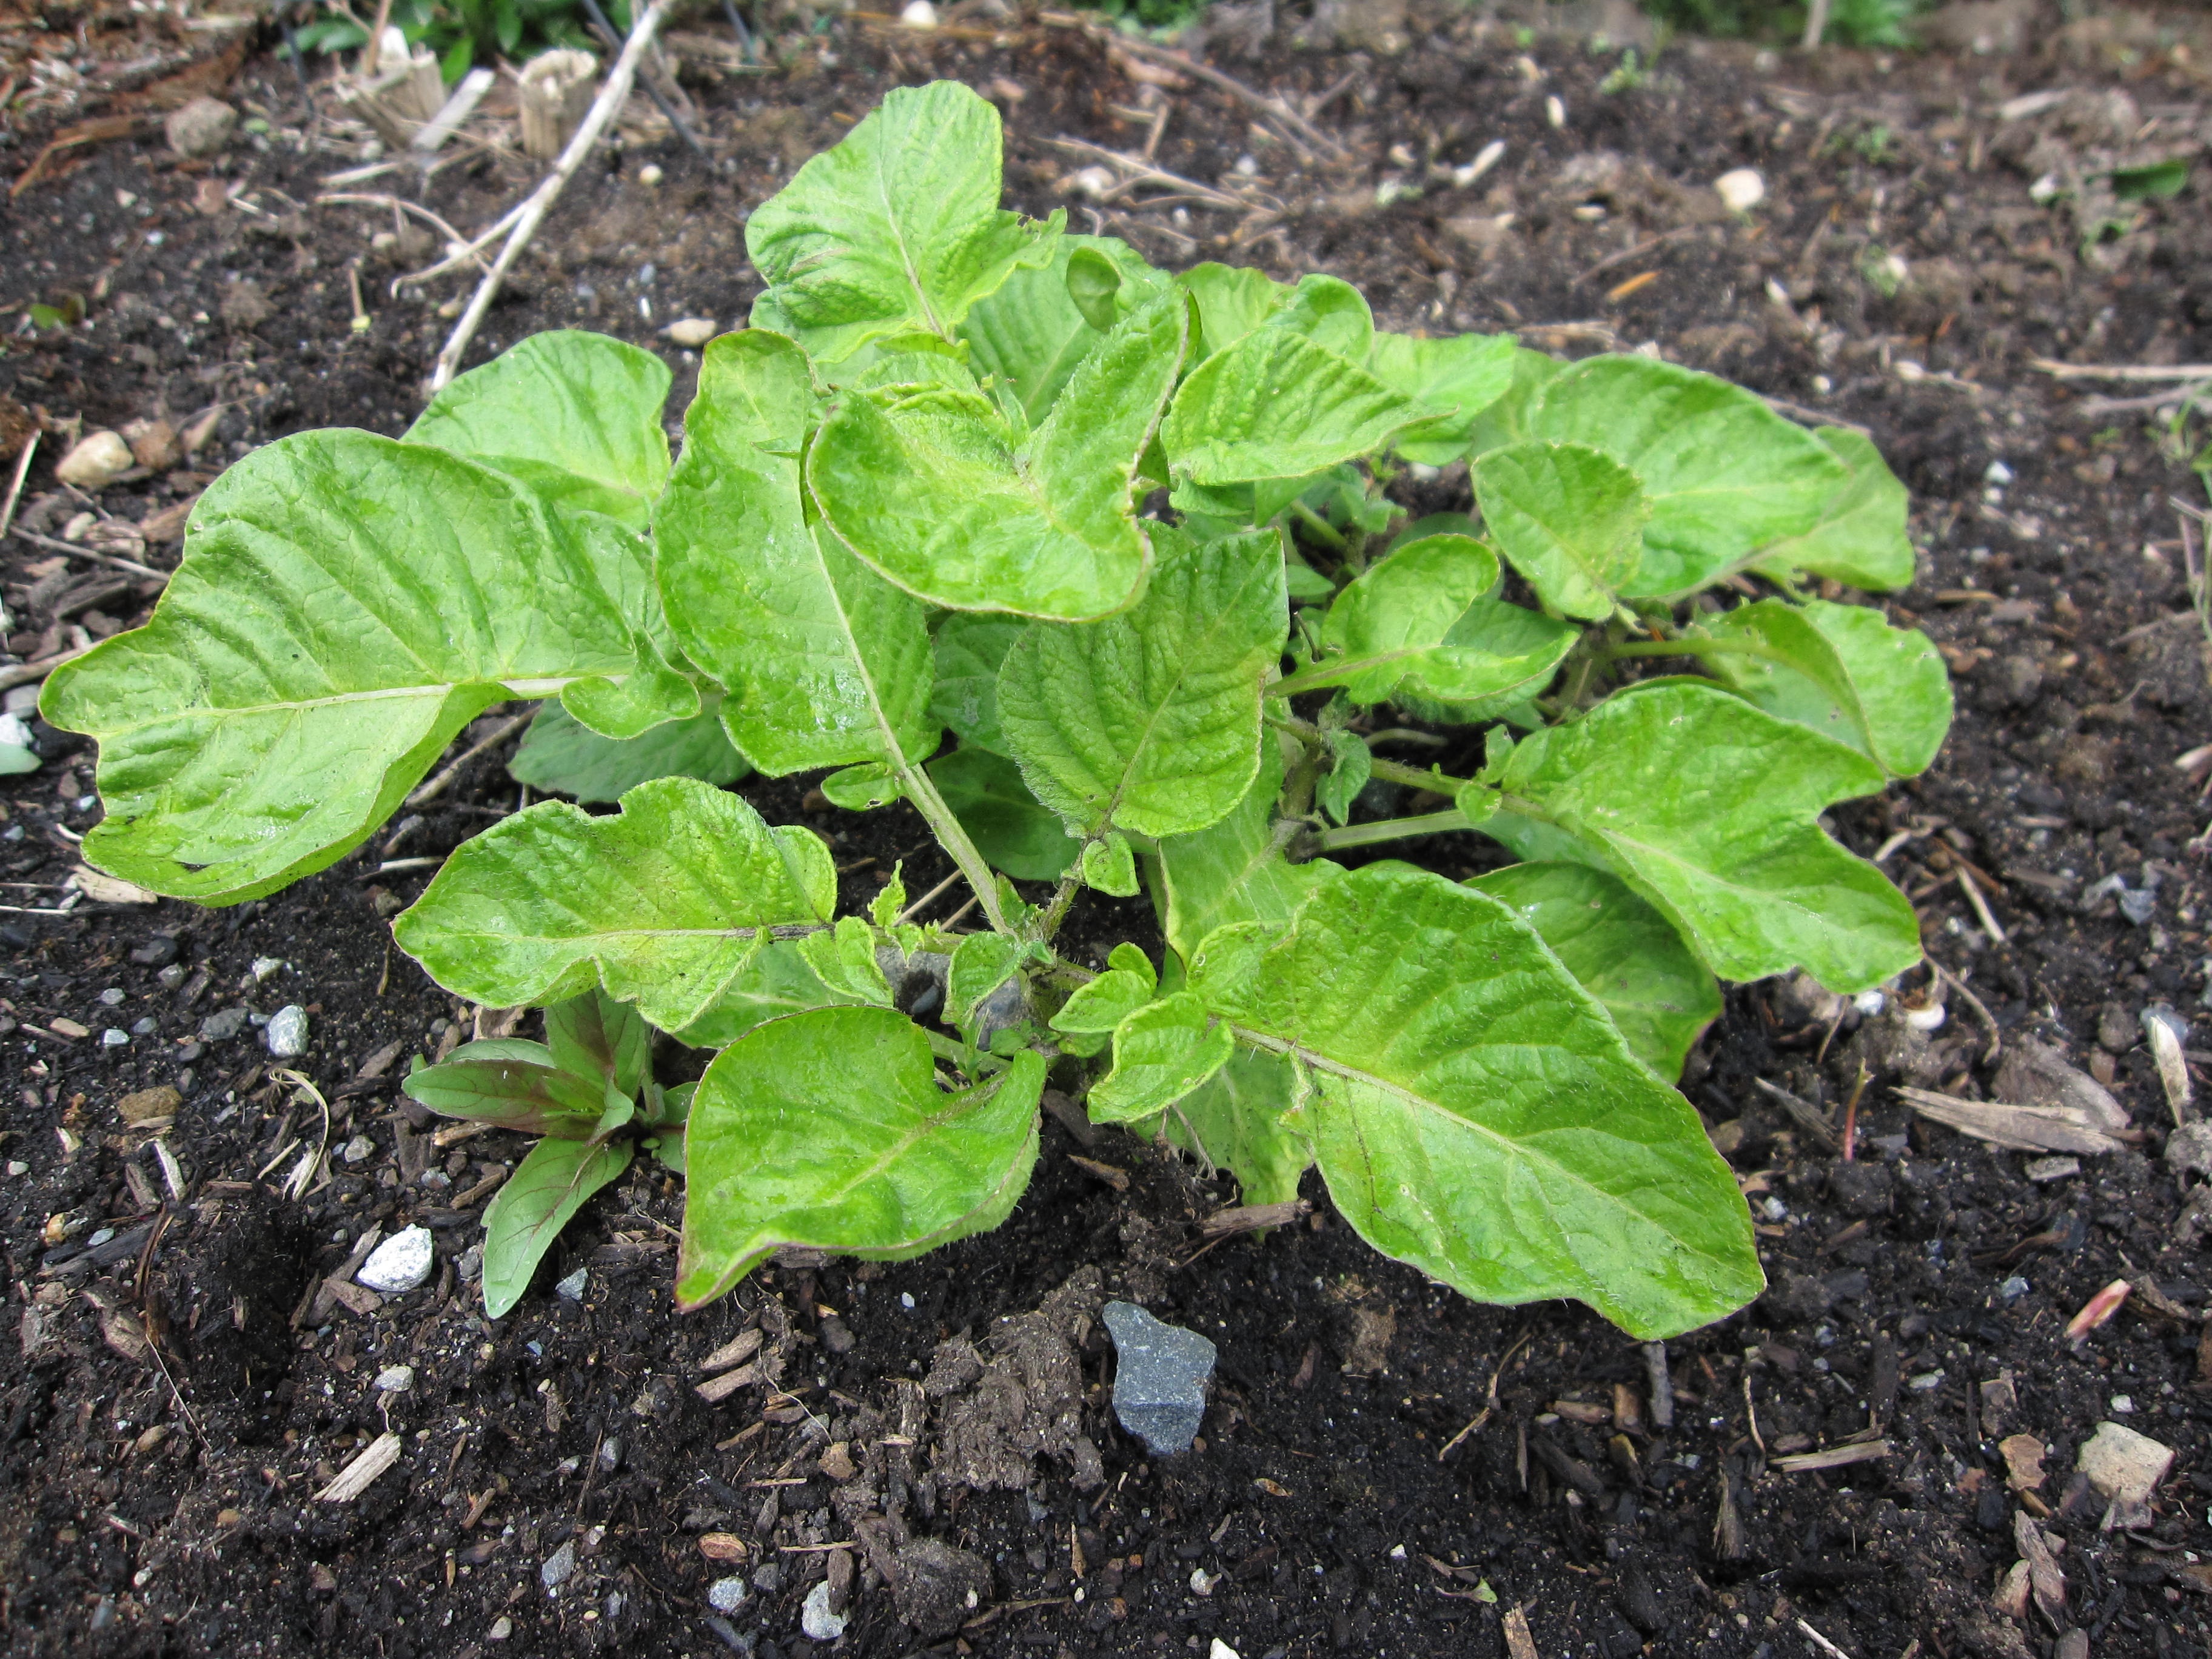 Growing Potatoes: What Does a Potato Plant Look Like? - PlantHD